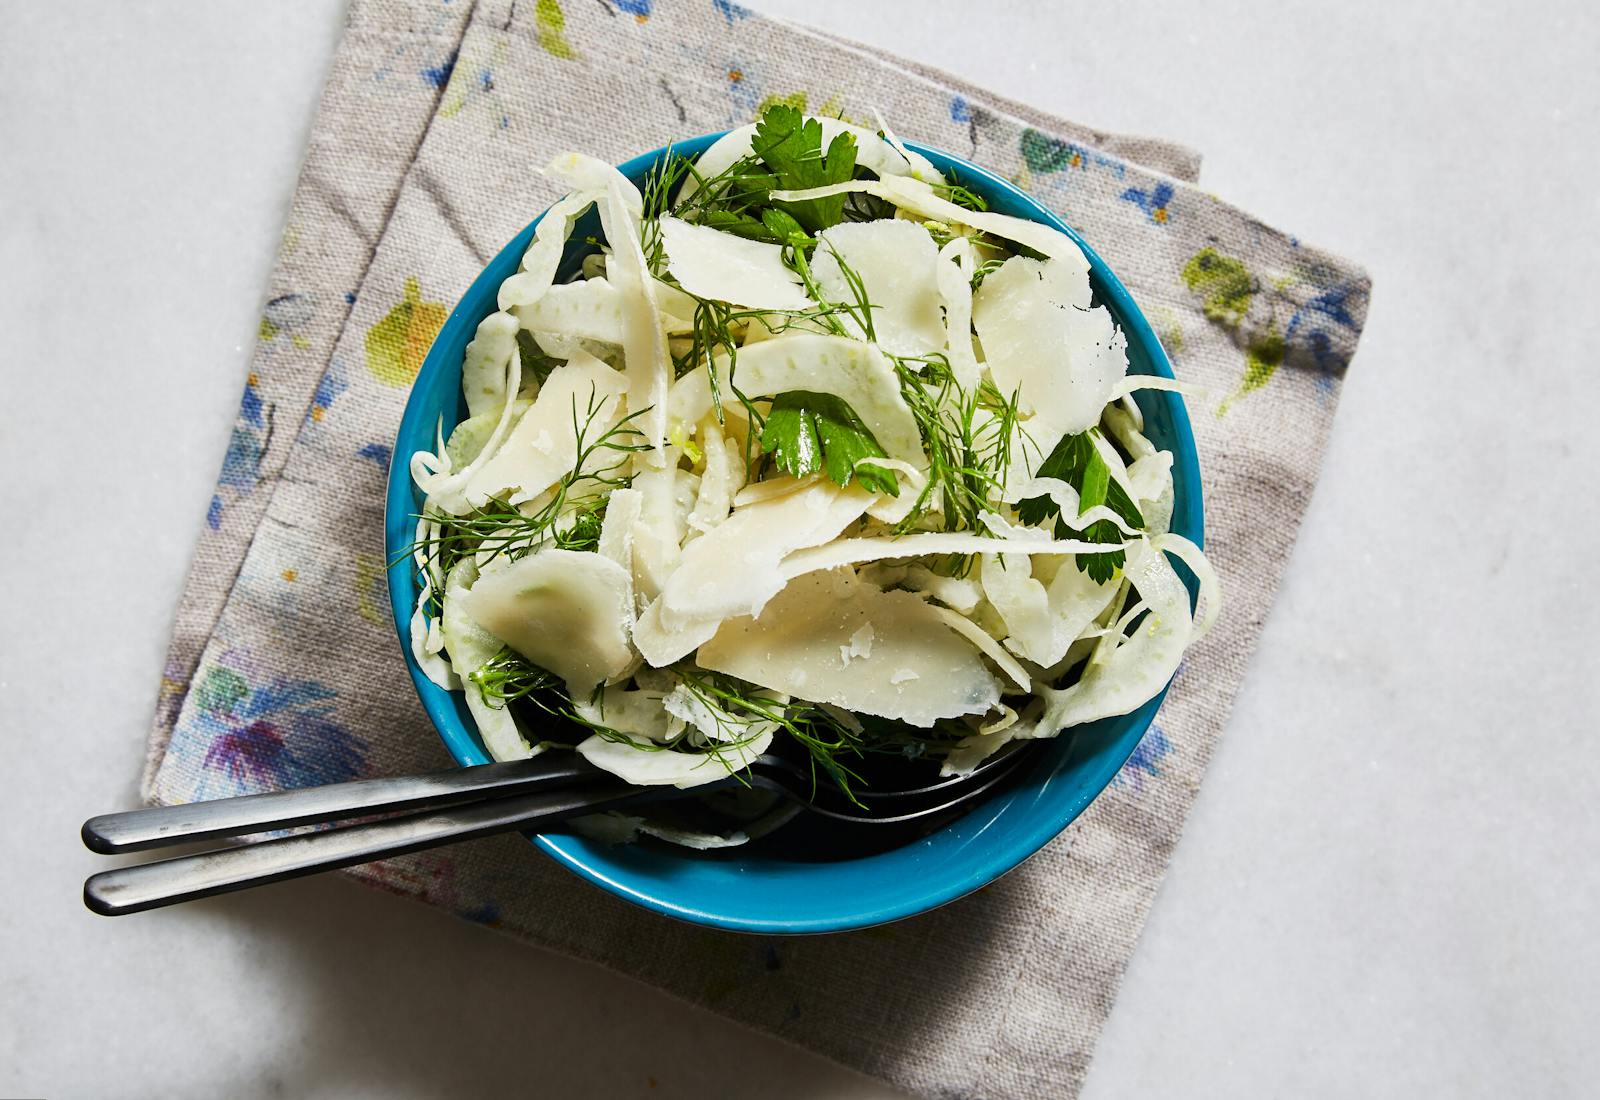 10. Fennel and Herb Salad